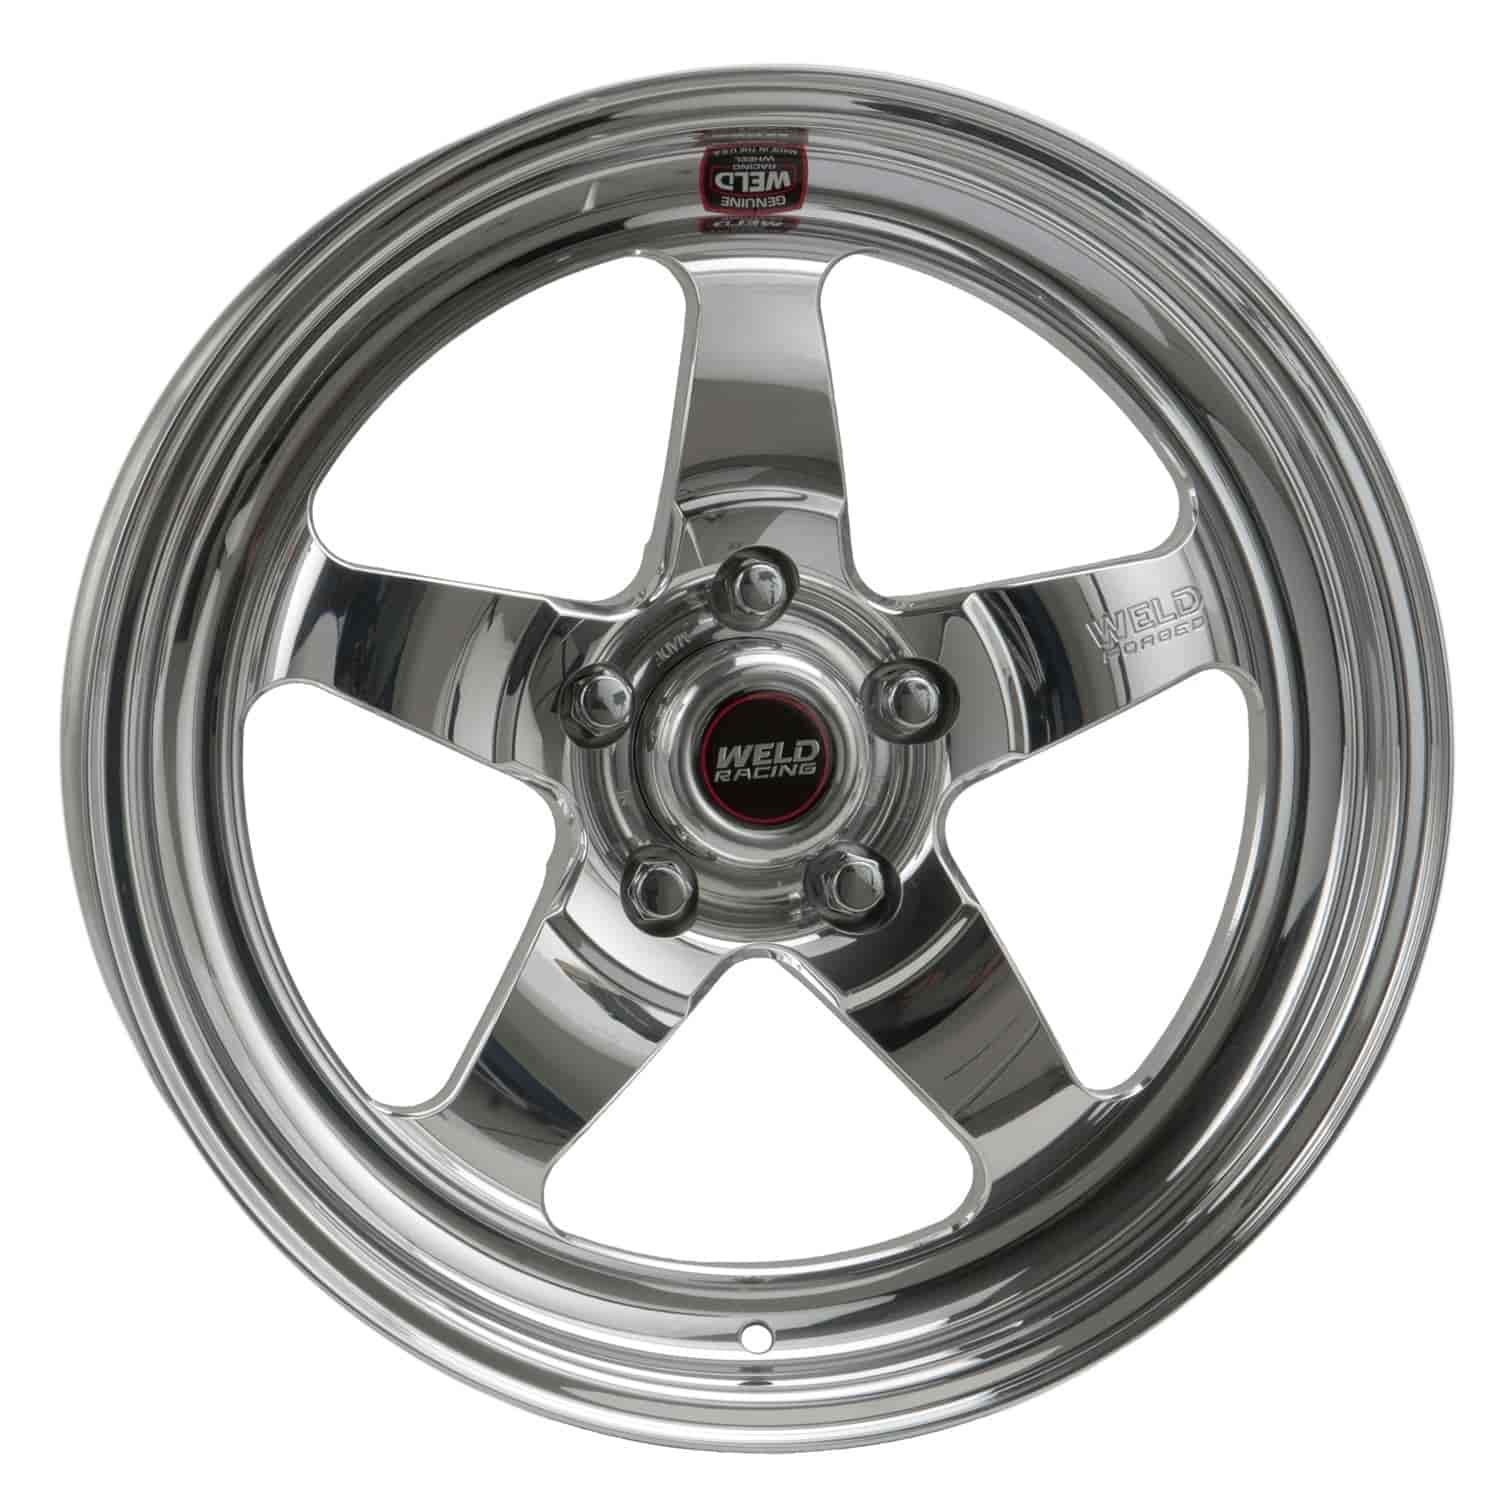 RT-S Series Wheel Size: 17" x 4-1/2" Bolt Circle: 5 x 4-3/4" Rear Spacing: 2.20" Offset: -13.97mm